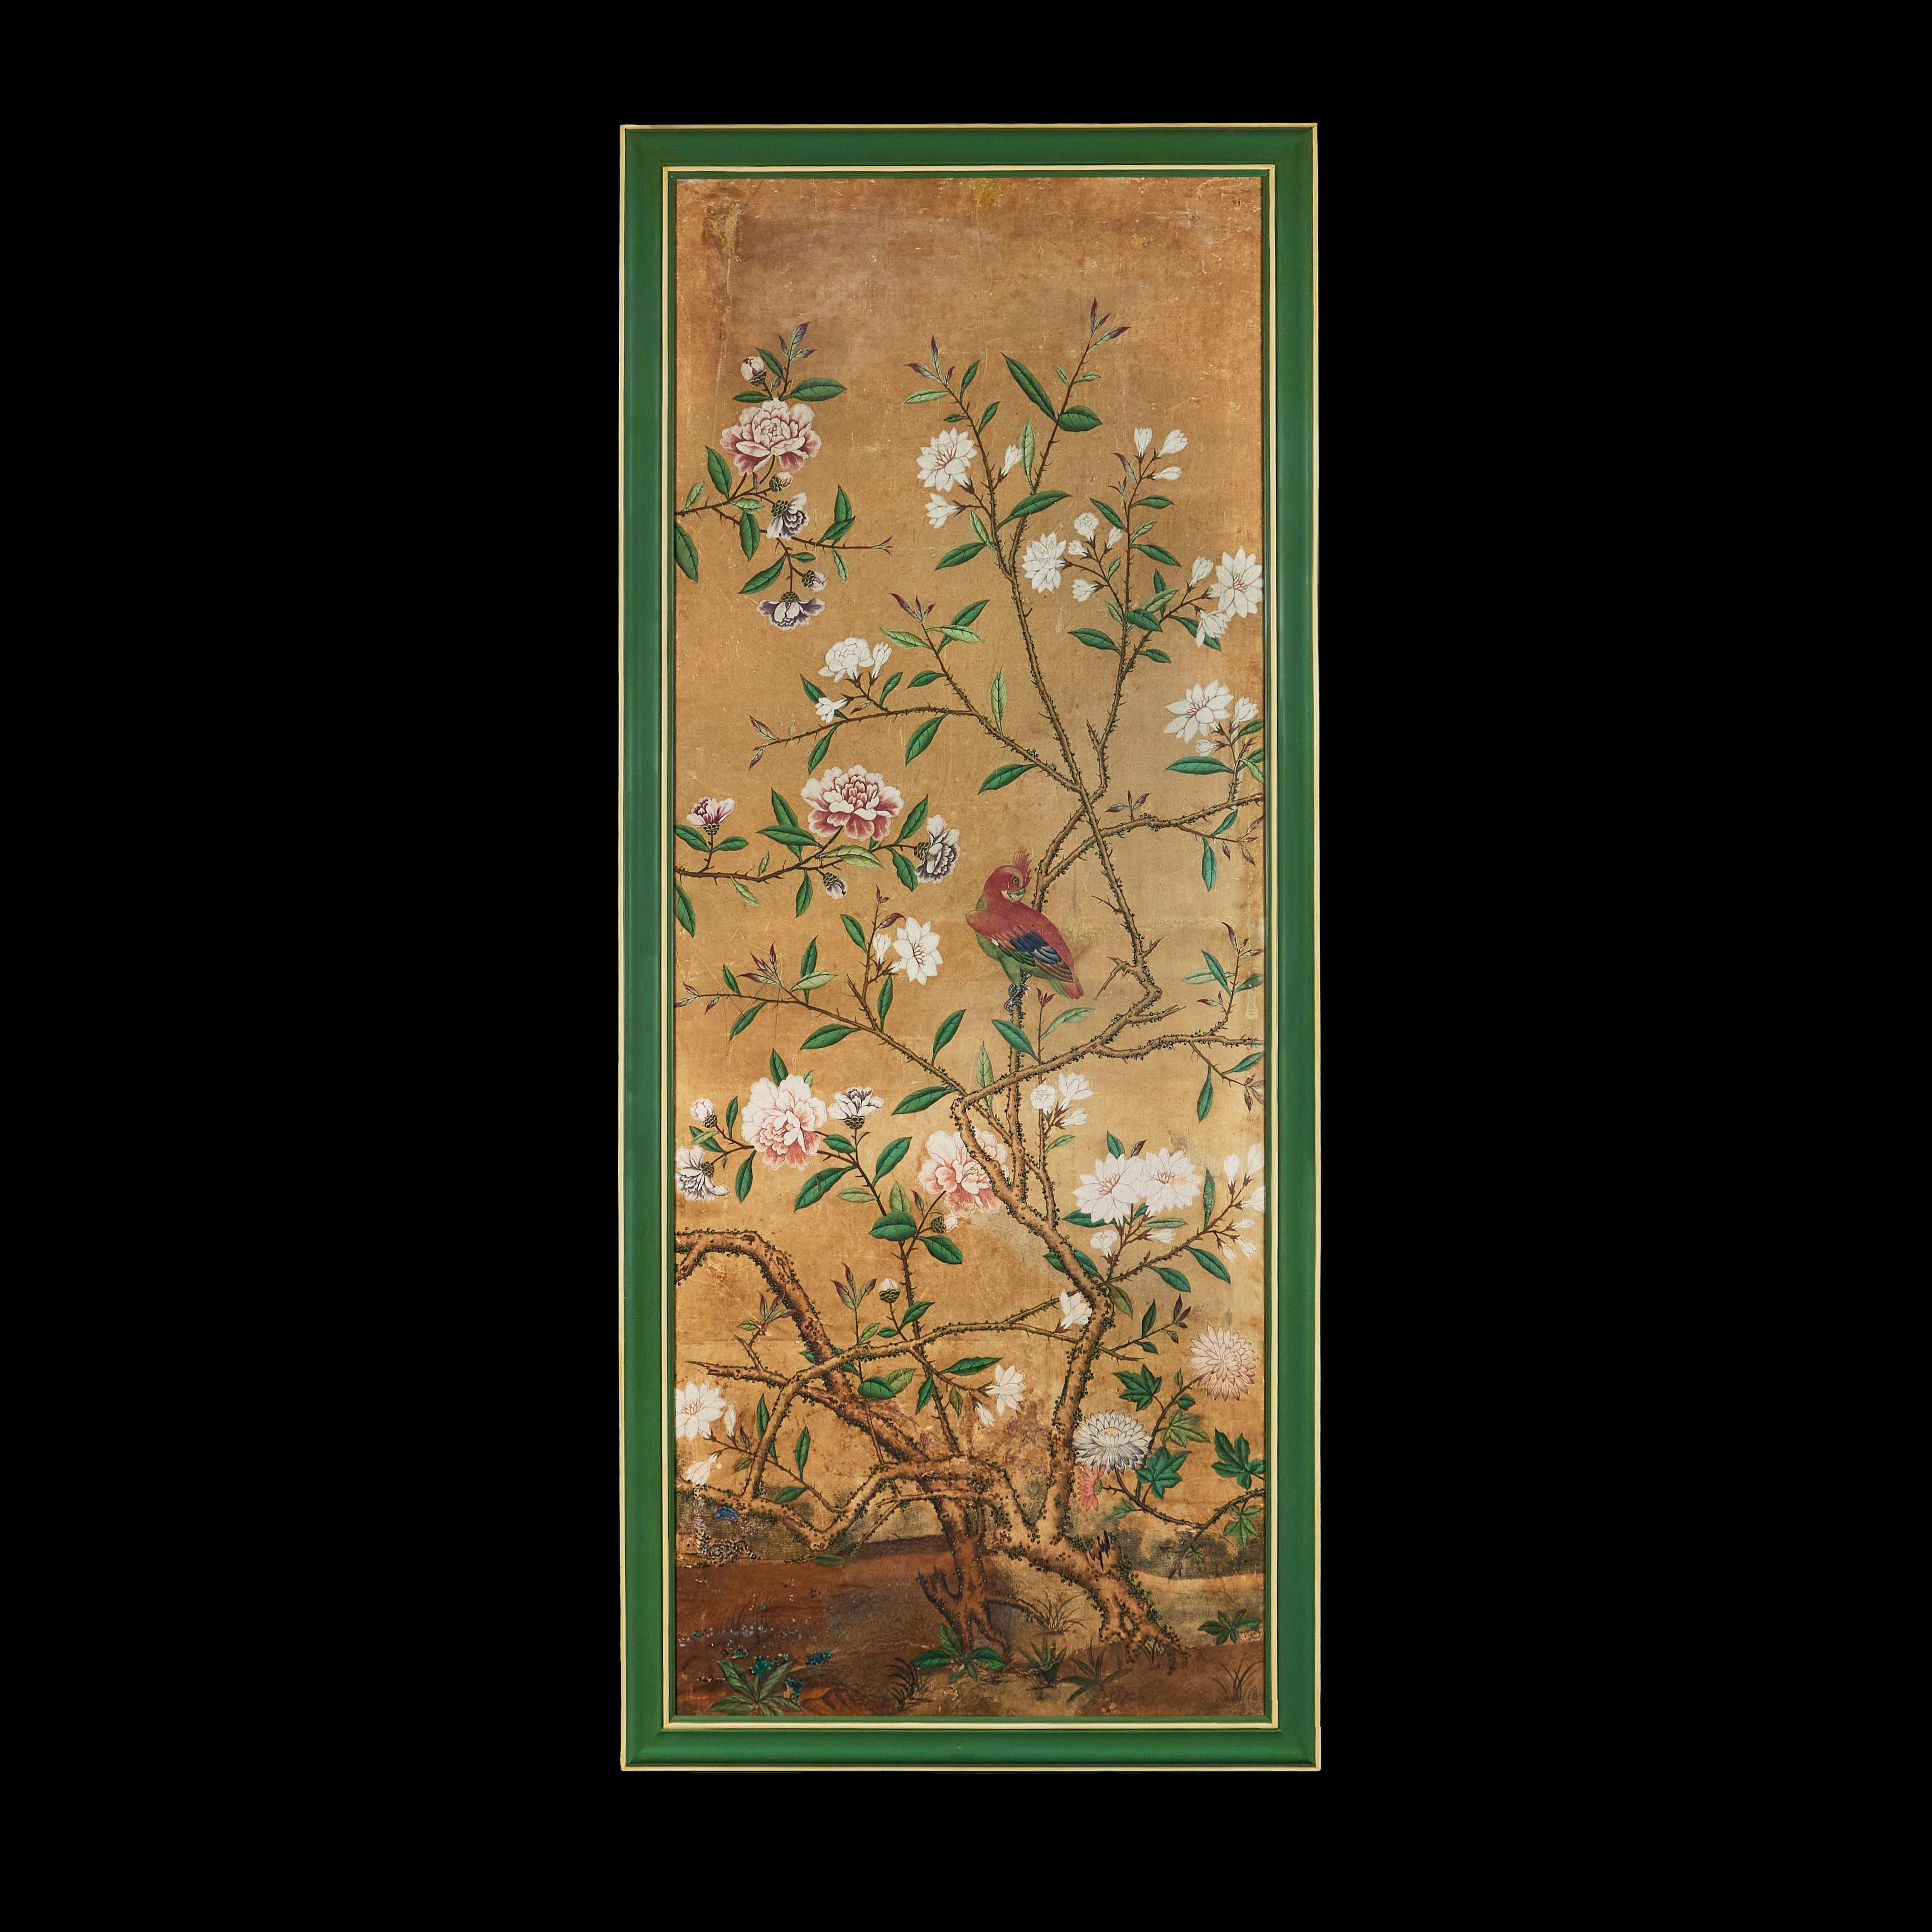 China, circa 1750

A fine pair of large panels of mid eighteenth century Chinese export wallpaper, the panels depicting foliage including peonies and prunus, each panel centrally painted with an exotic Chinese parrot, with pairs of conjugal birds